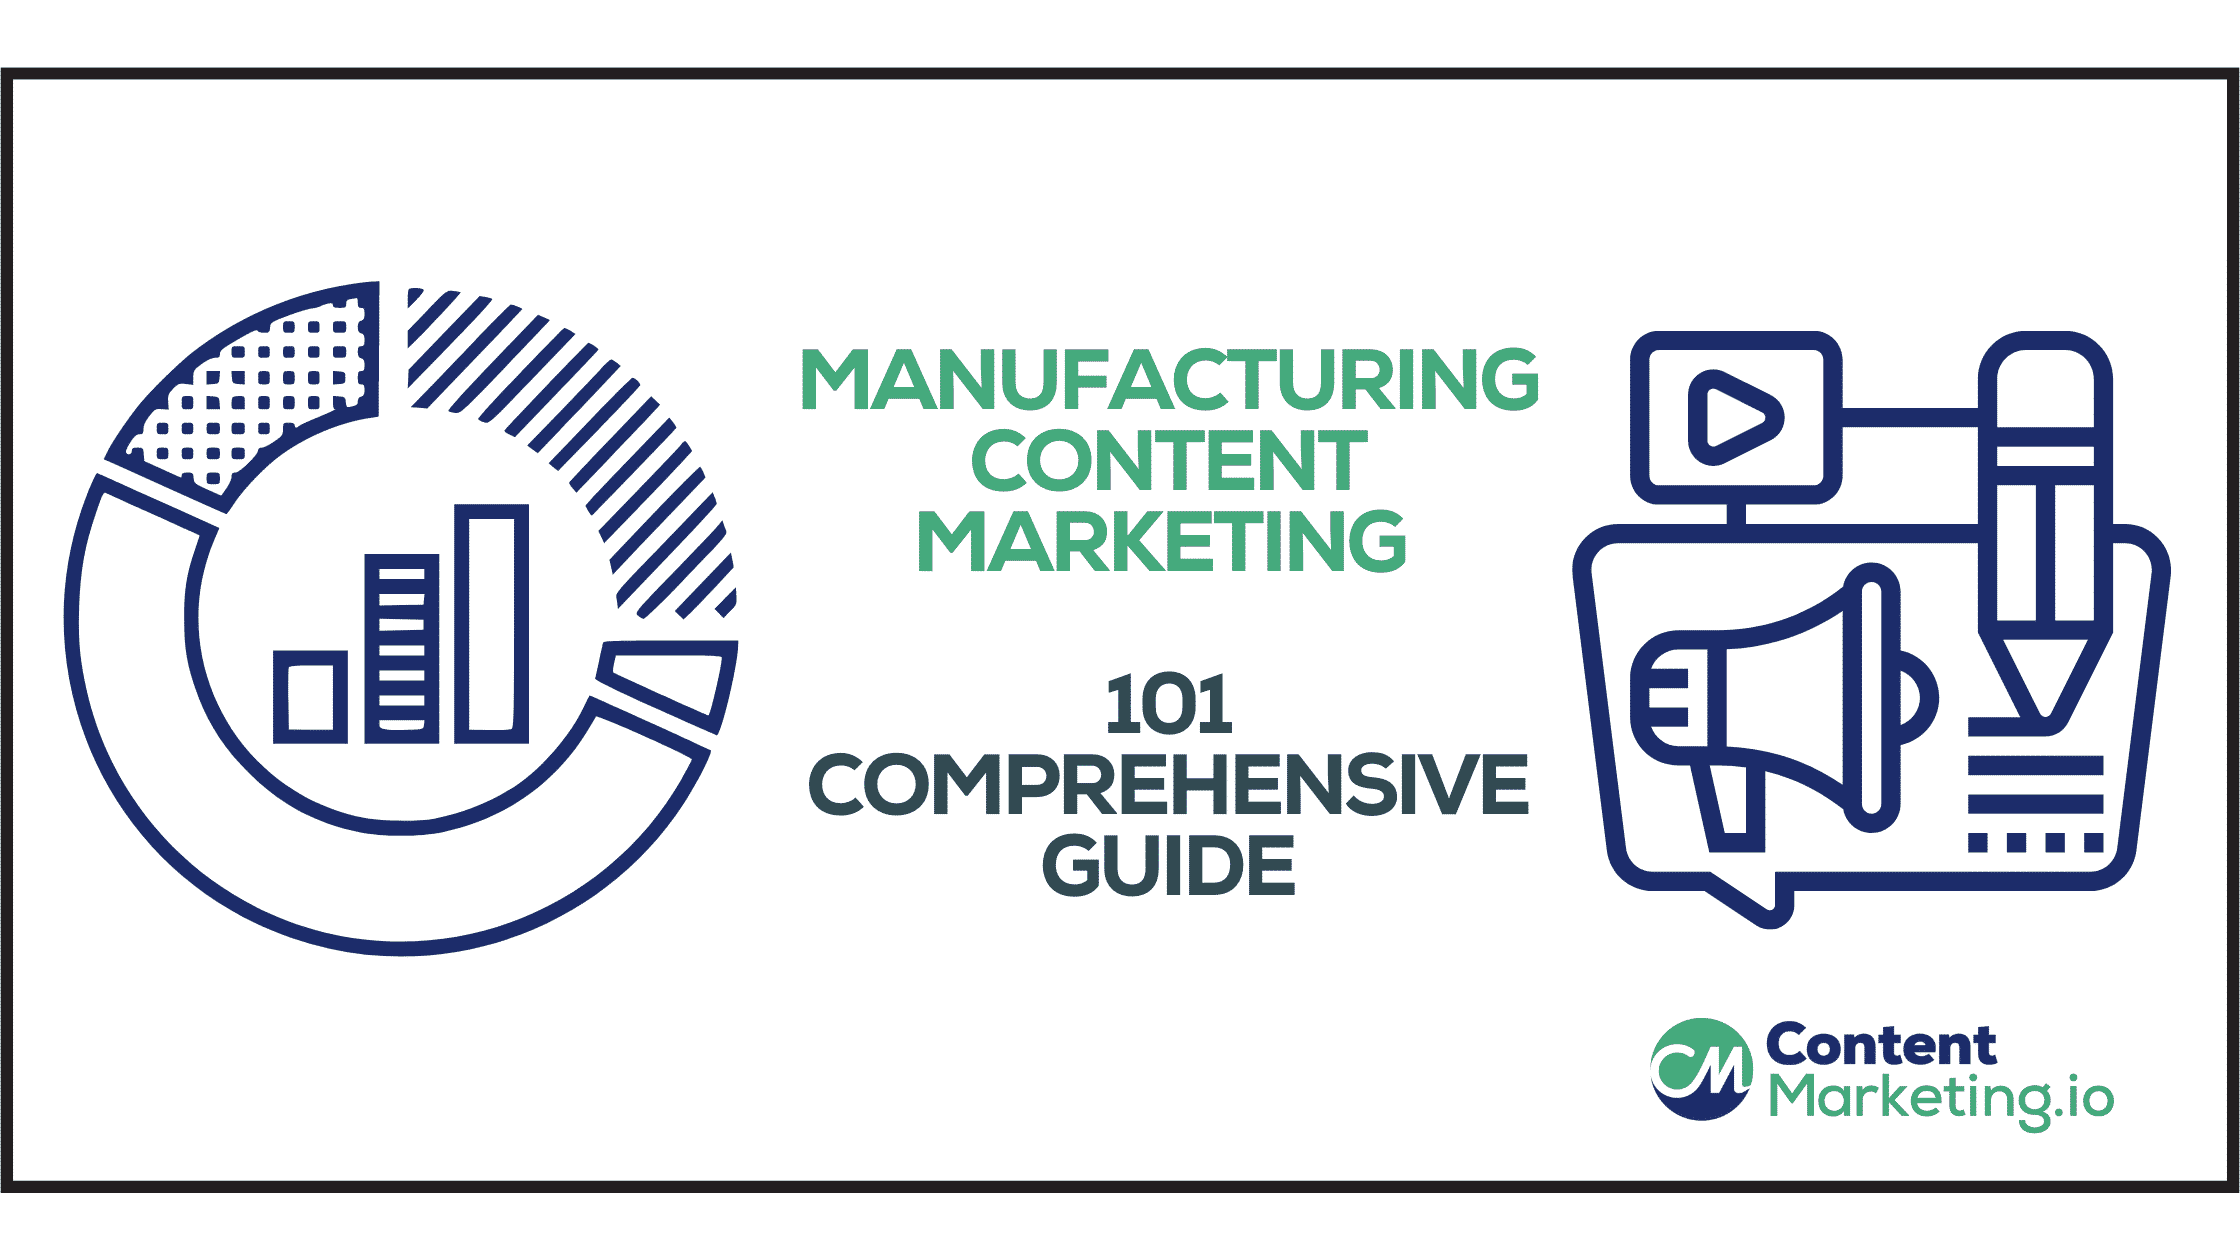 Manufacturing Content Marketing